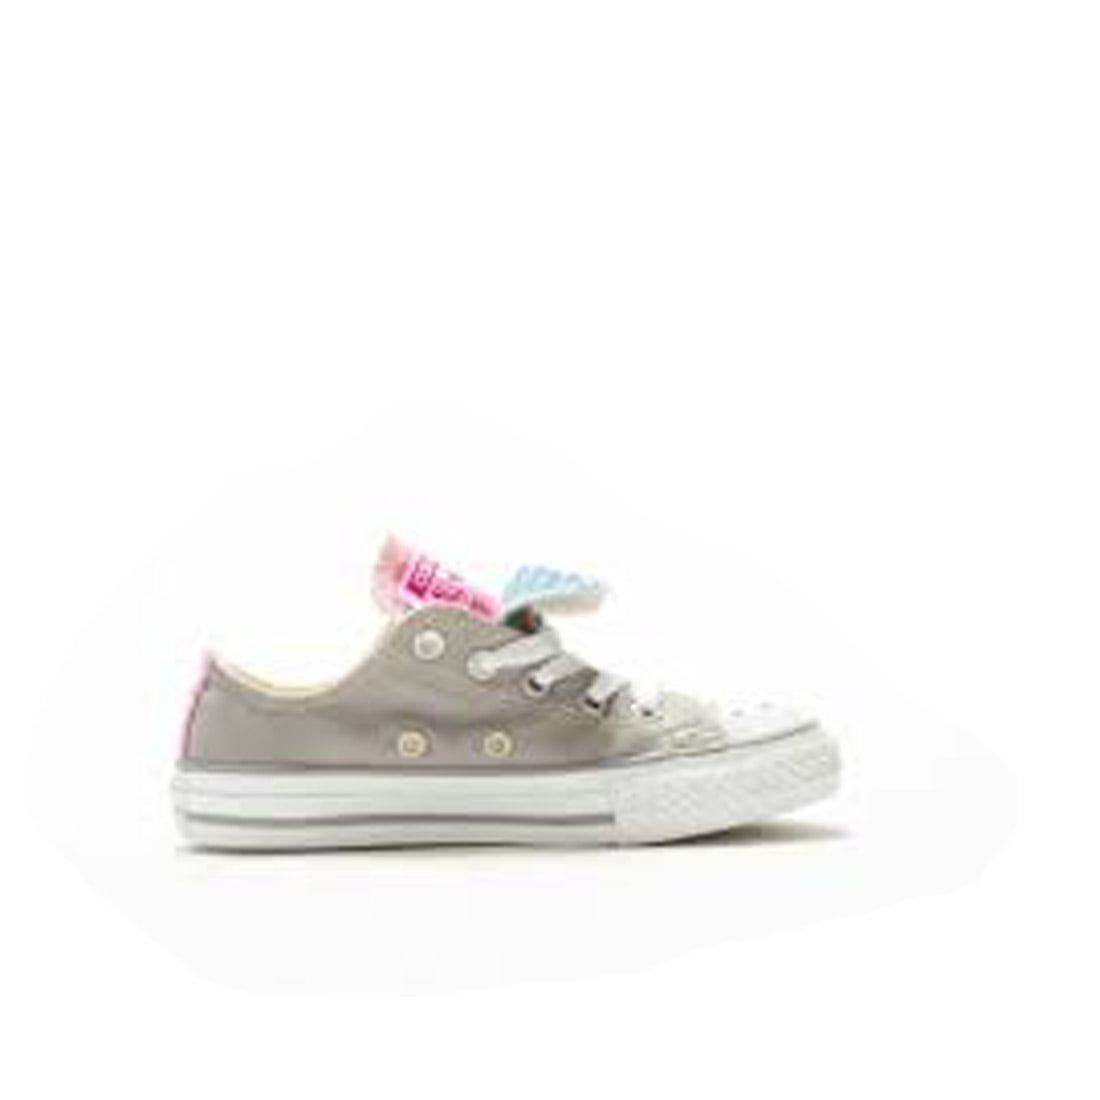 uddøde grill Barn Converse Chuck Taylor All Star Double Tongue Star Perf Ox Unisex/Child Shoe  Size Little Kid 3 Casual 647639F Gray/Pink - Walmart.com